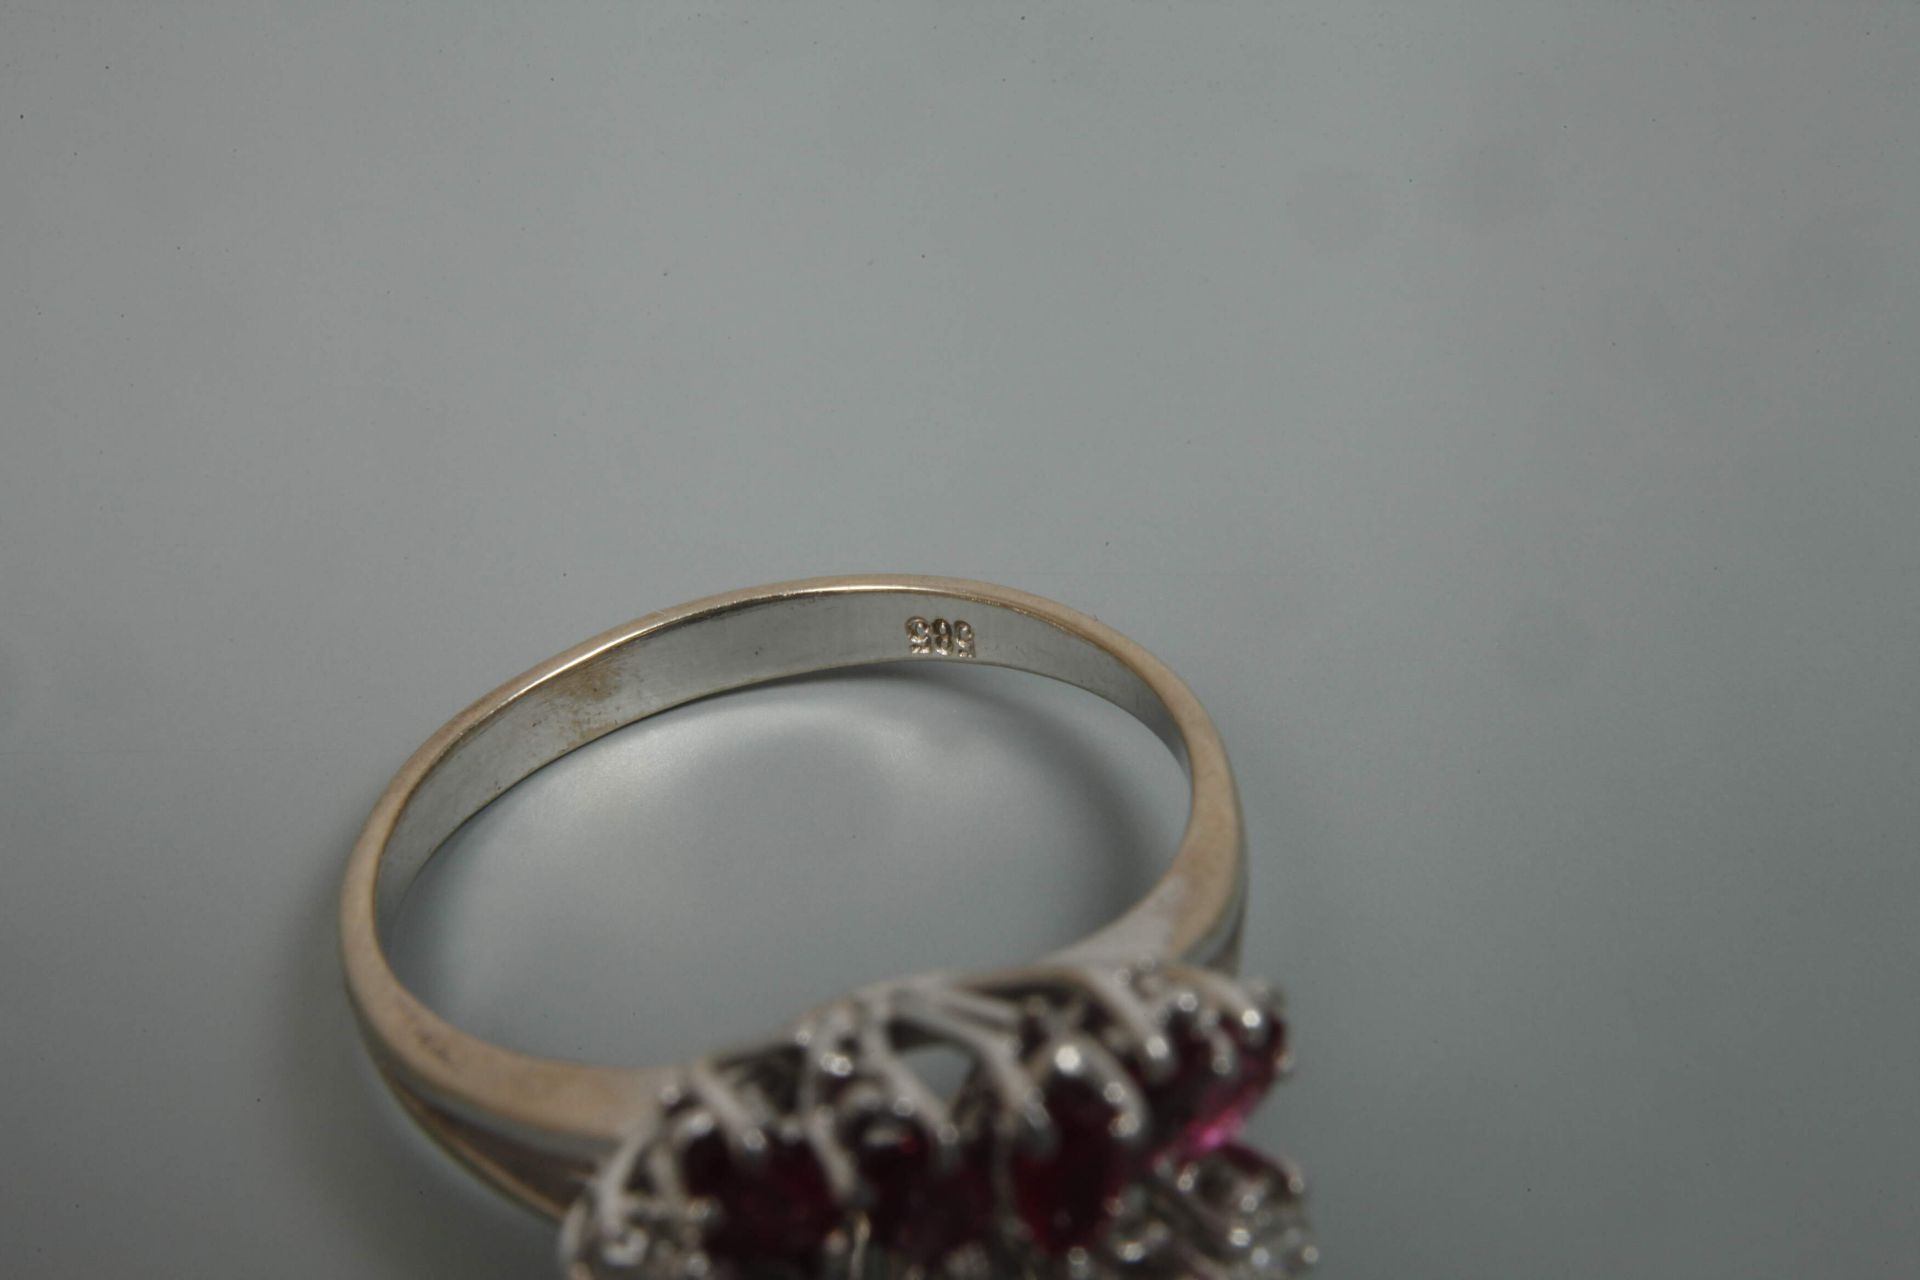 Lady's ring with rubies and brilliant-cut diamonds - Image 3 of 4